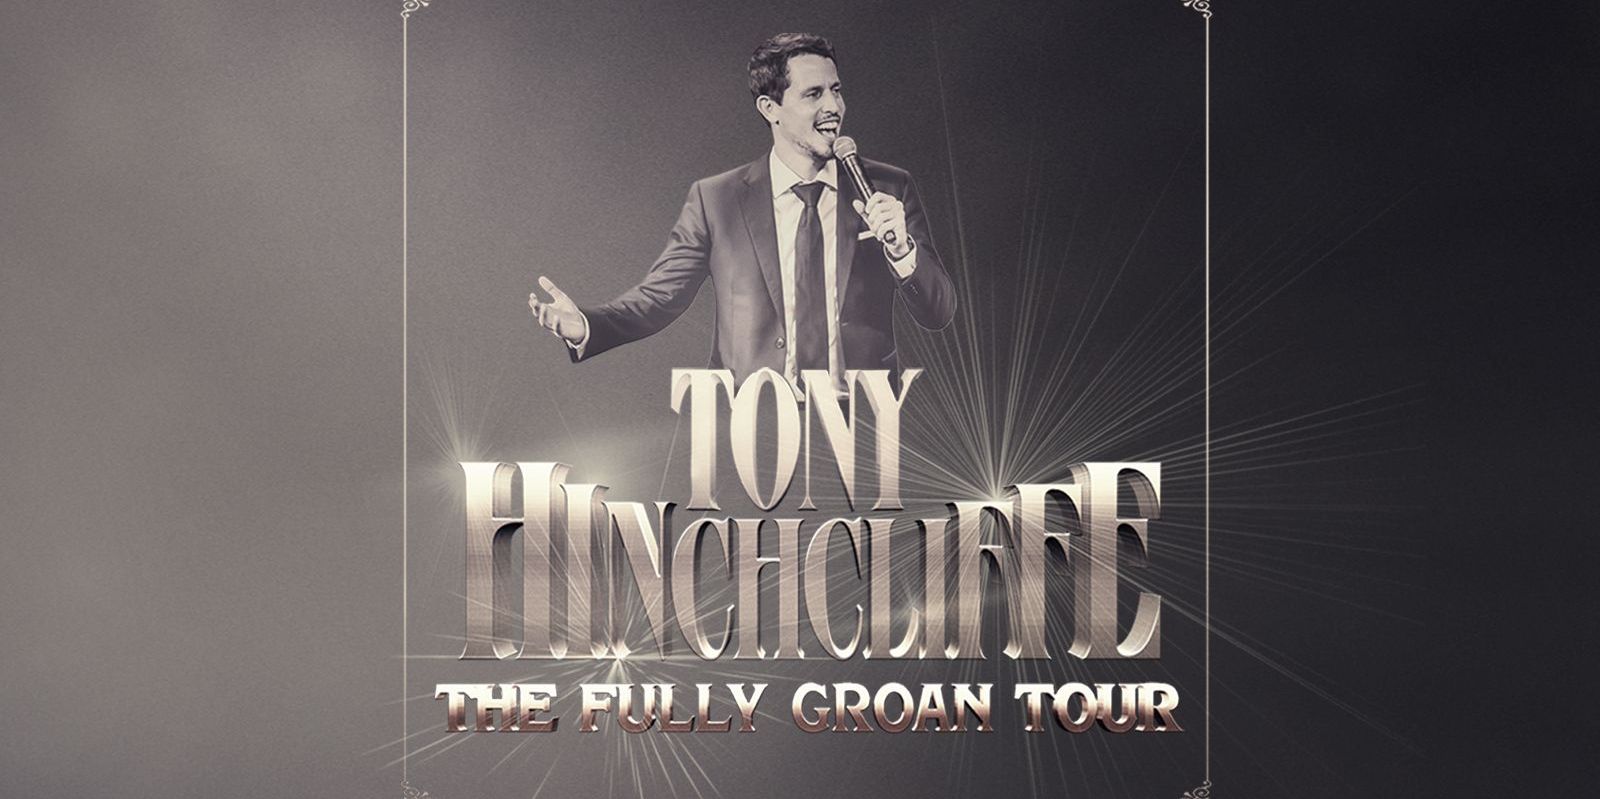 Tony Hinchcliffe: Fully Groan Tour promotional image